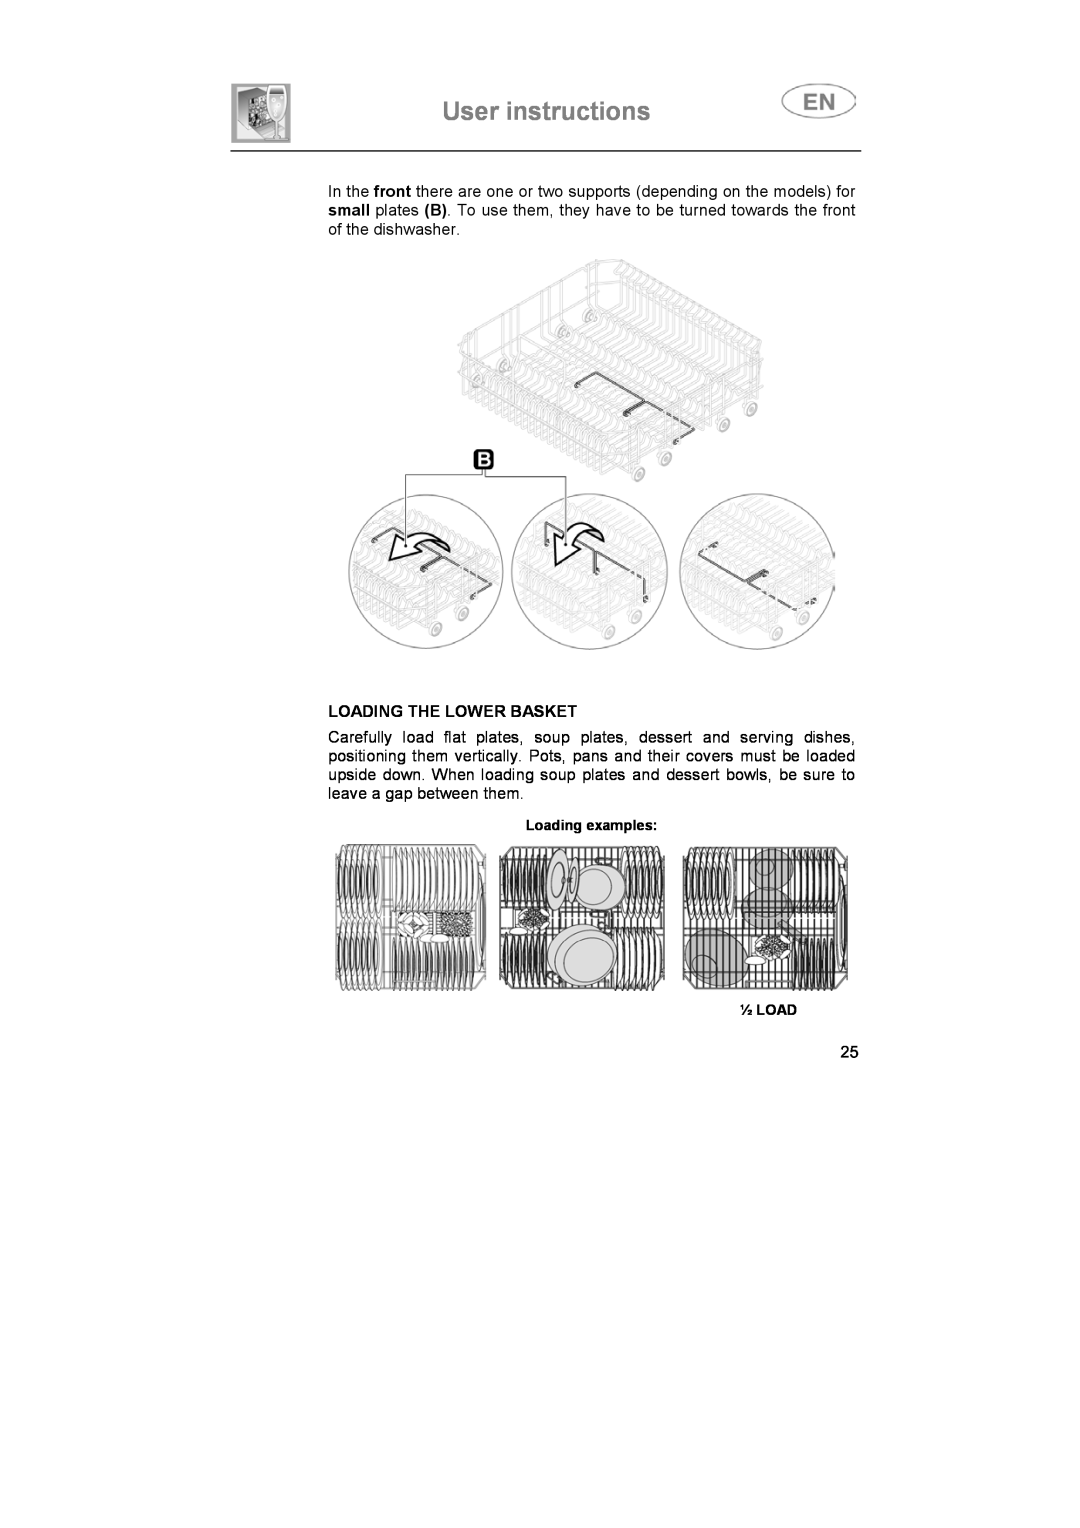 Smeg DF614BE, DF614FAS7 instruction manual User instructions, Loading The Lower Basket, Loading examples ½ LOAD 